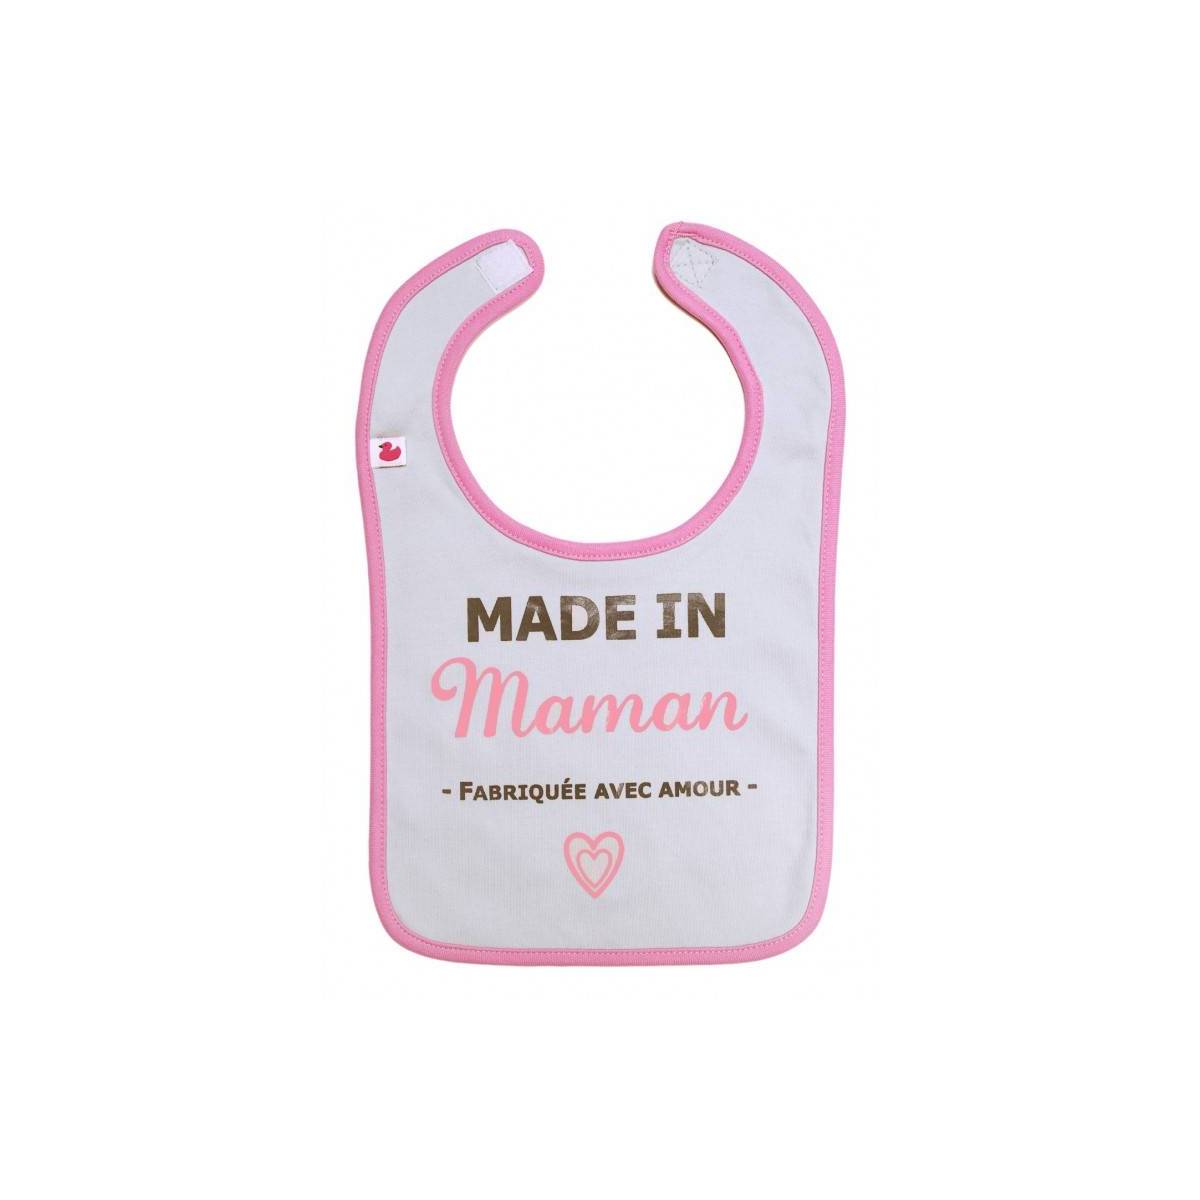 Bavoir "Made in maman" BB&Co - Fille